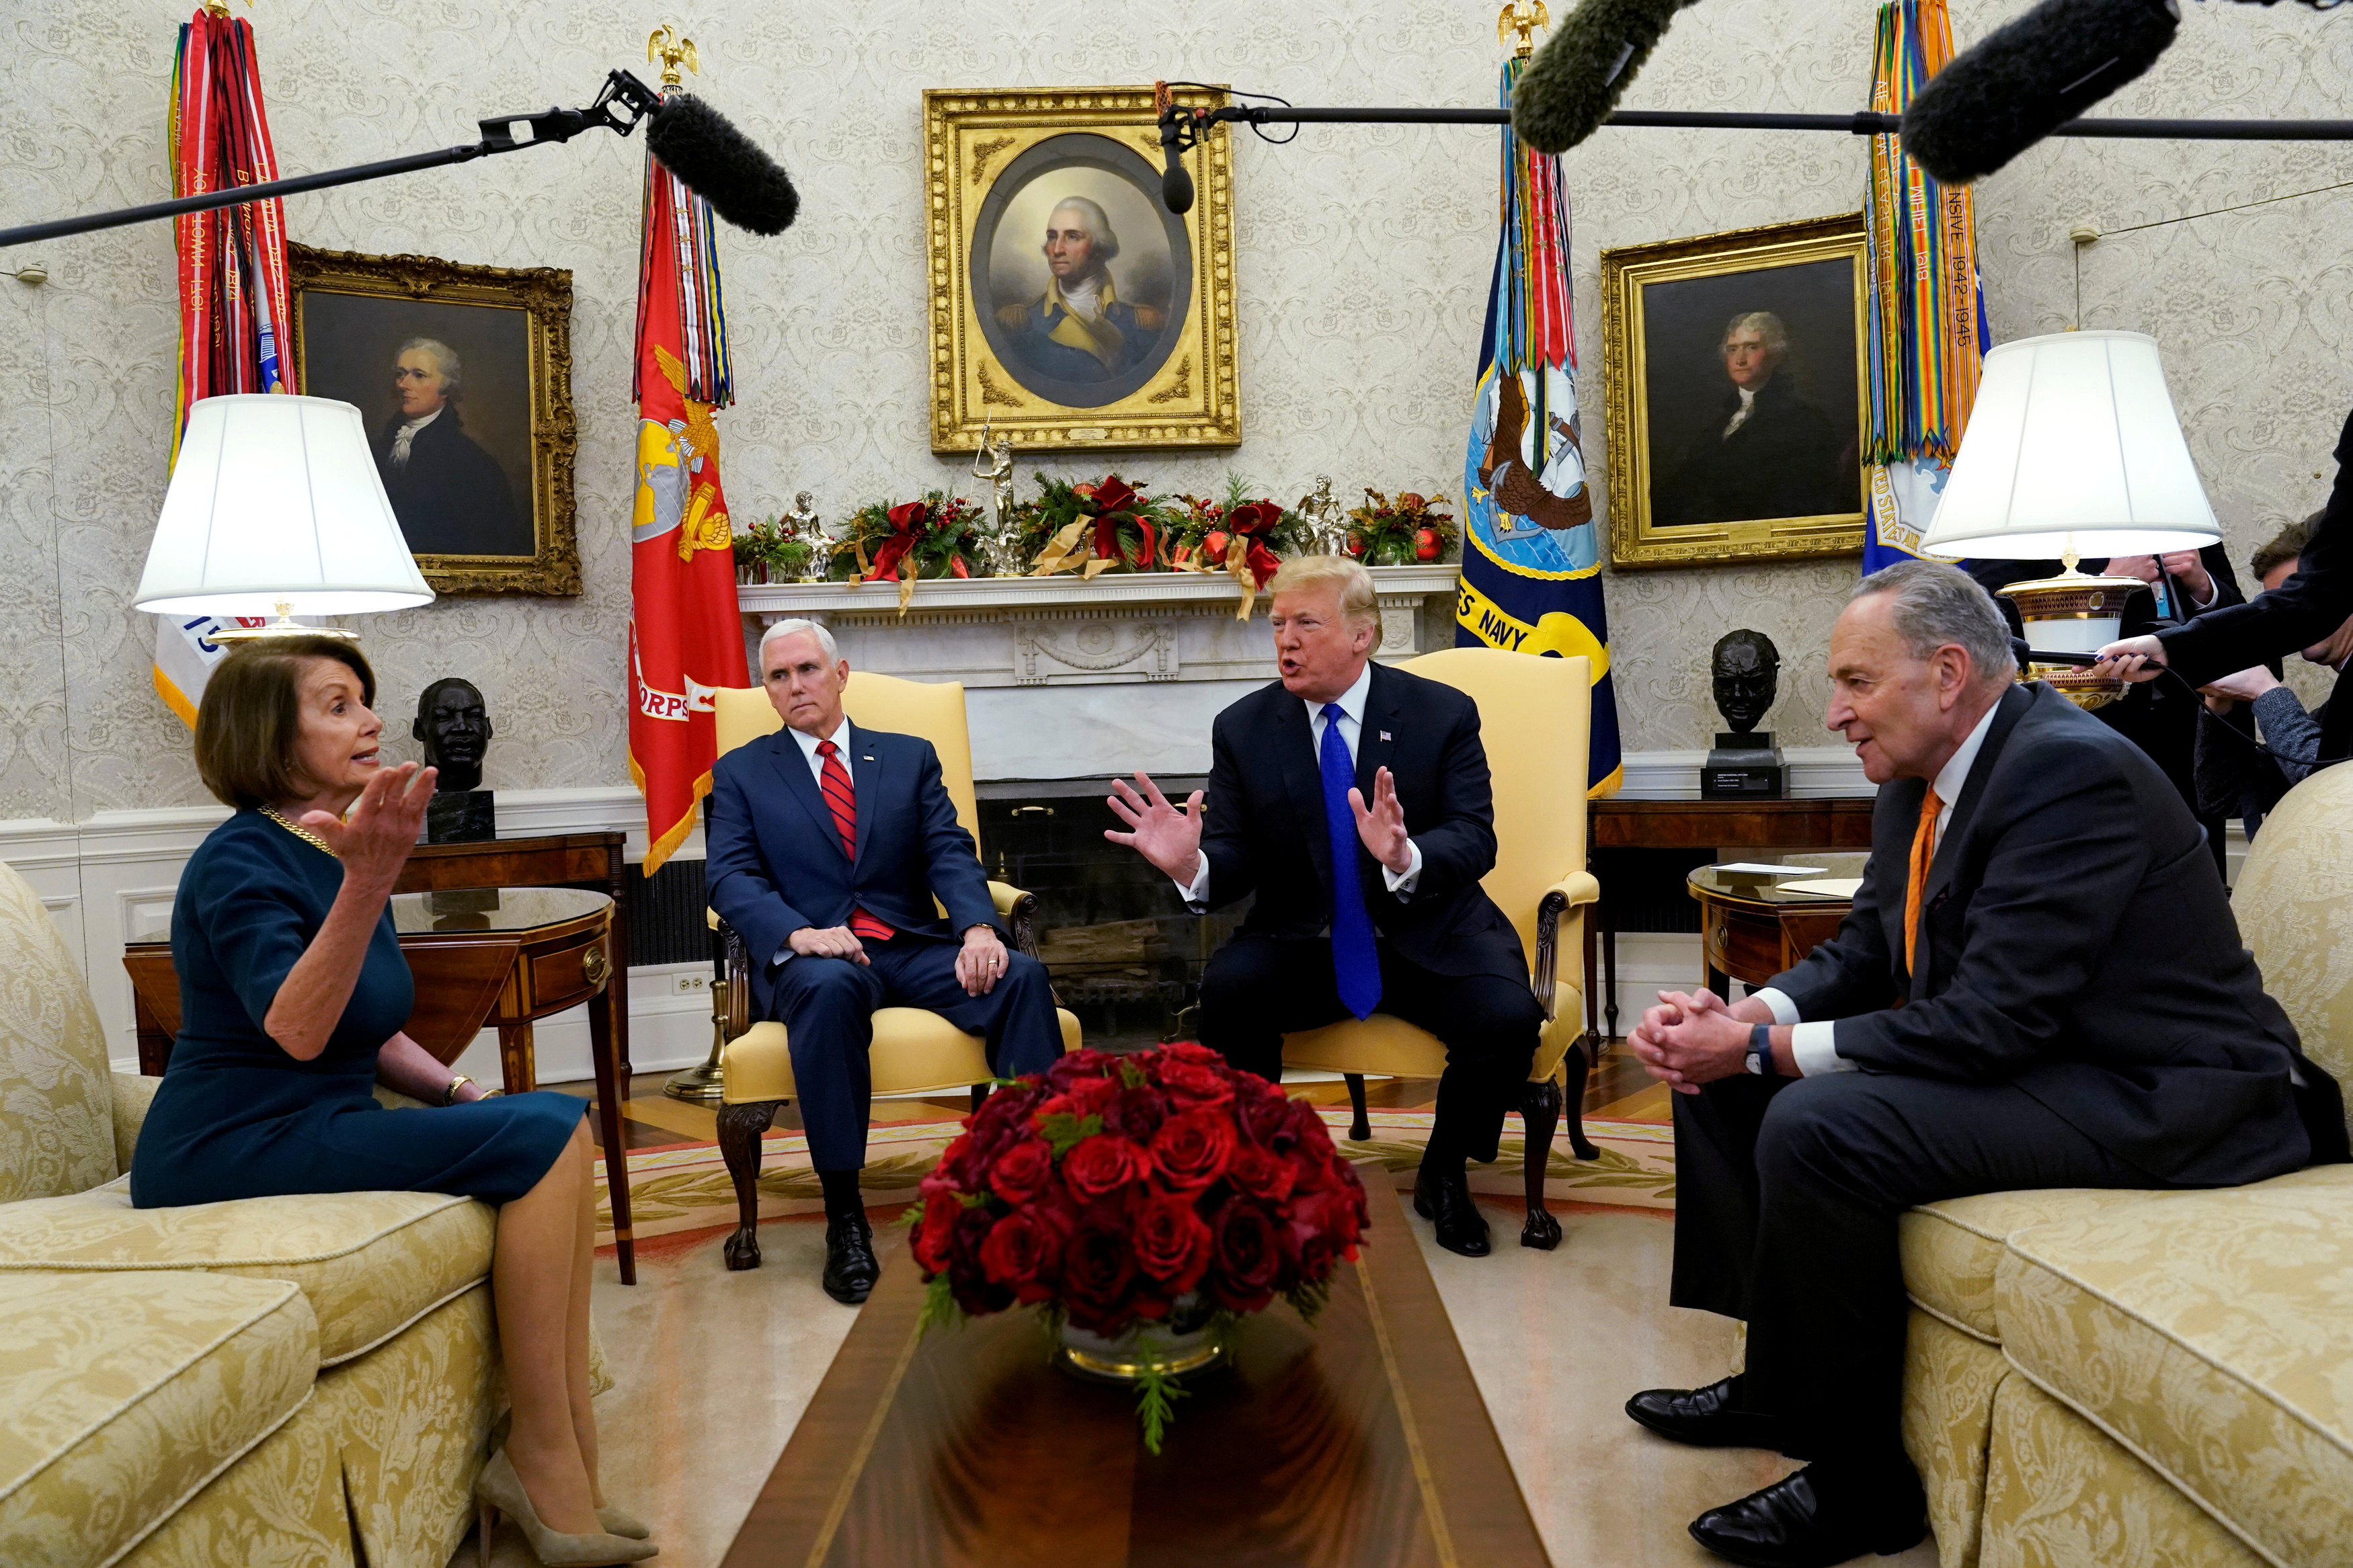 President Donald Trump speaks next to VP Mike Pence while meeting with Senate Democratic Leader Chuck Schumer and House Democratic Leader Nancy Pelosi at the White House REUTERS/Kevin Lamarque